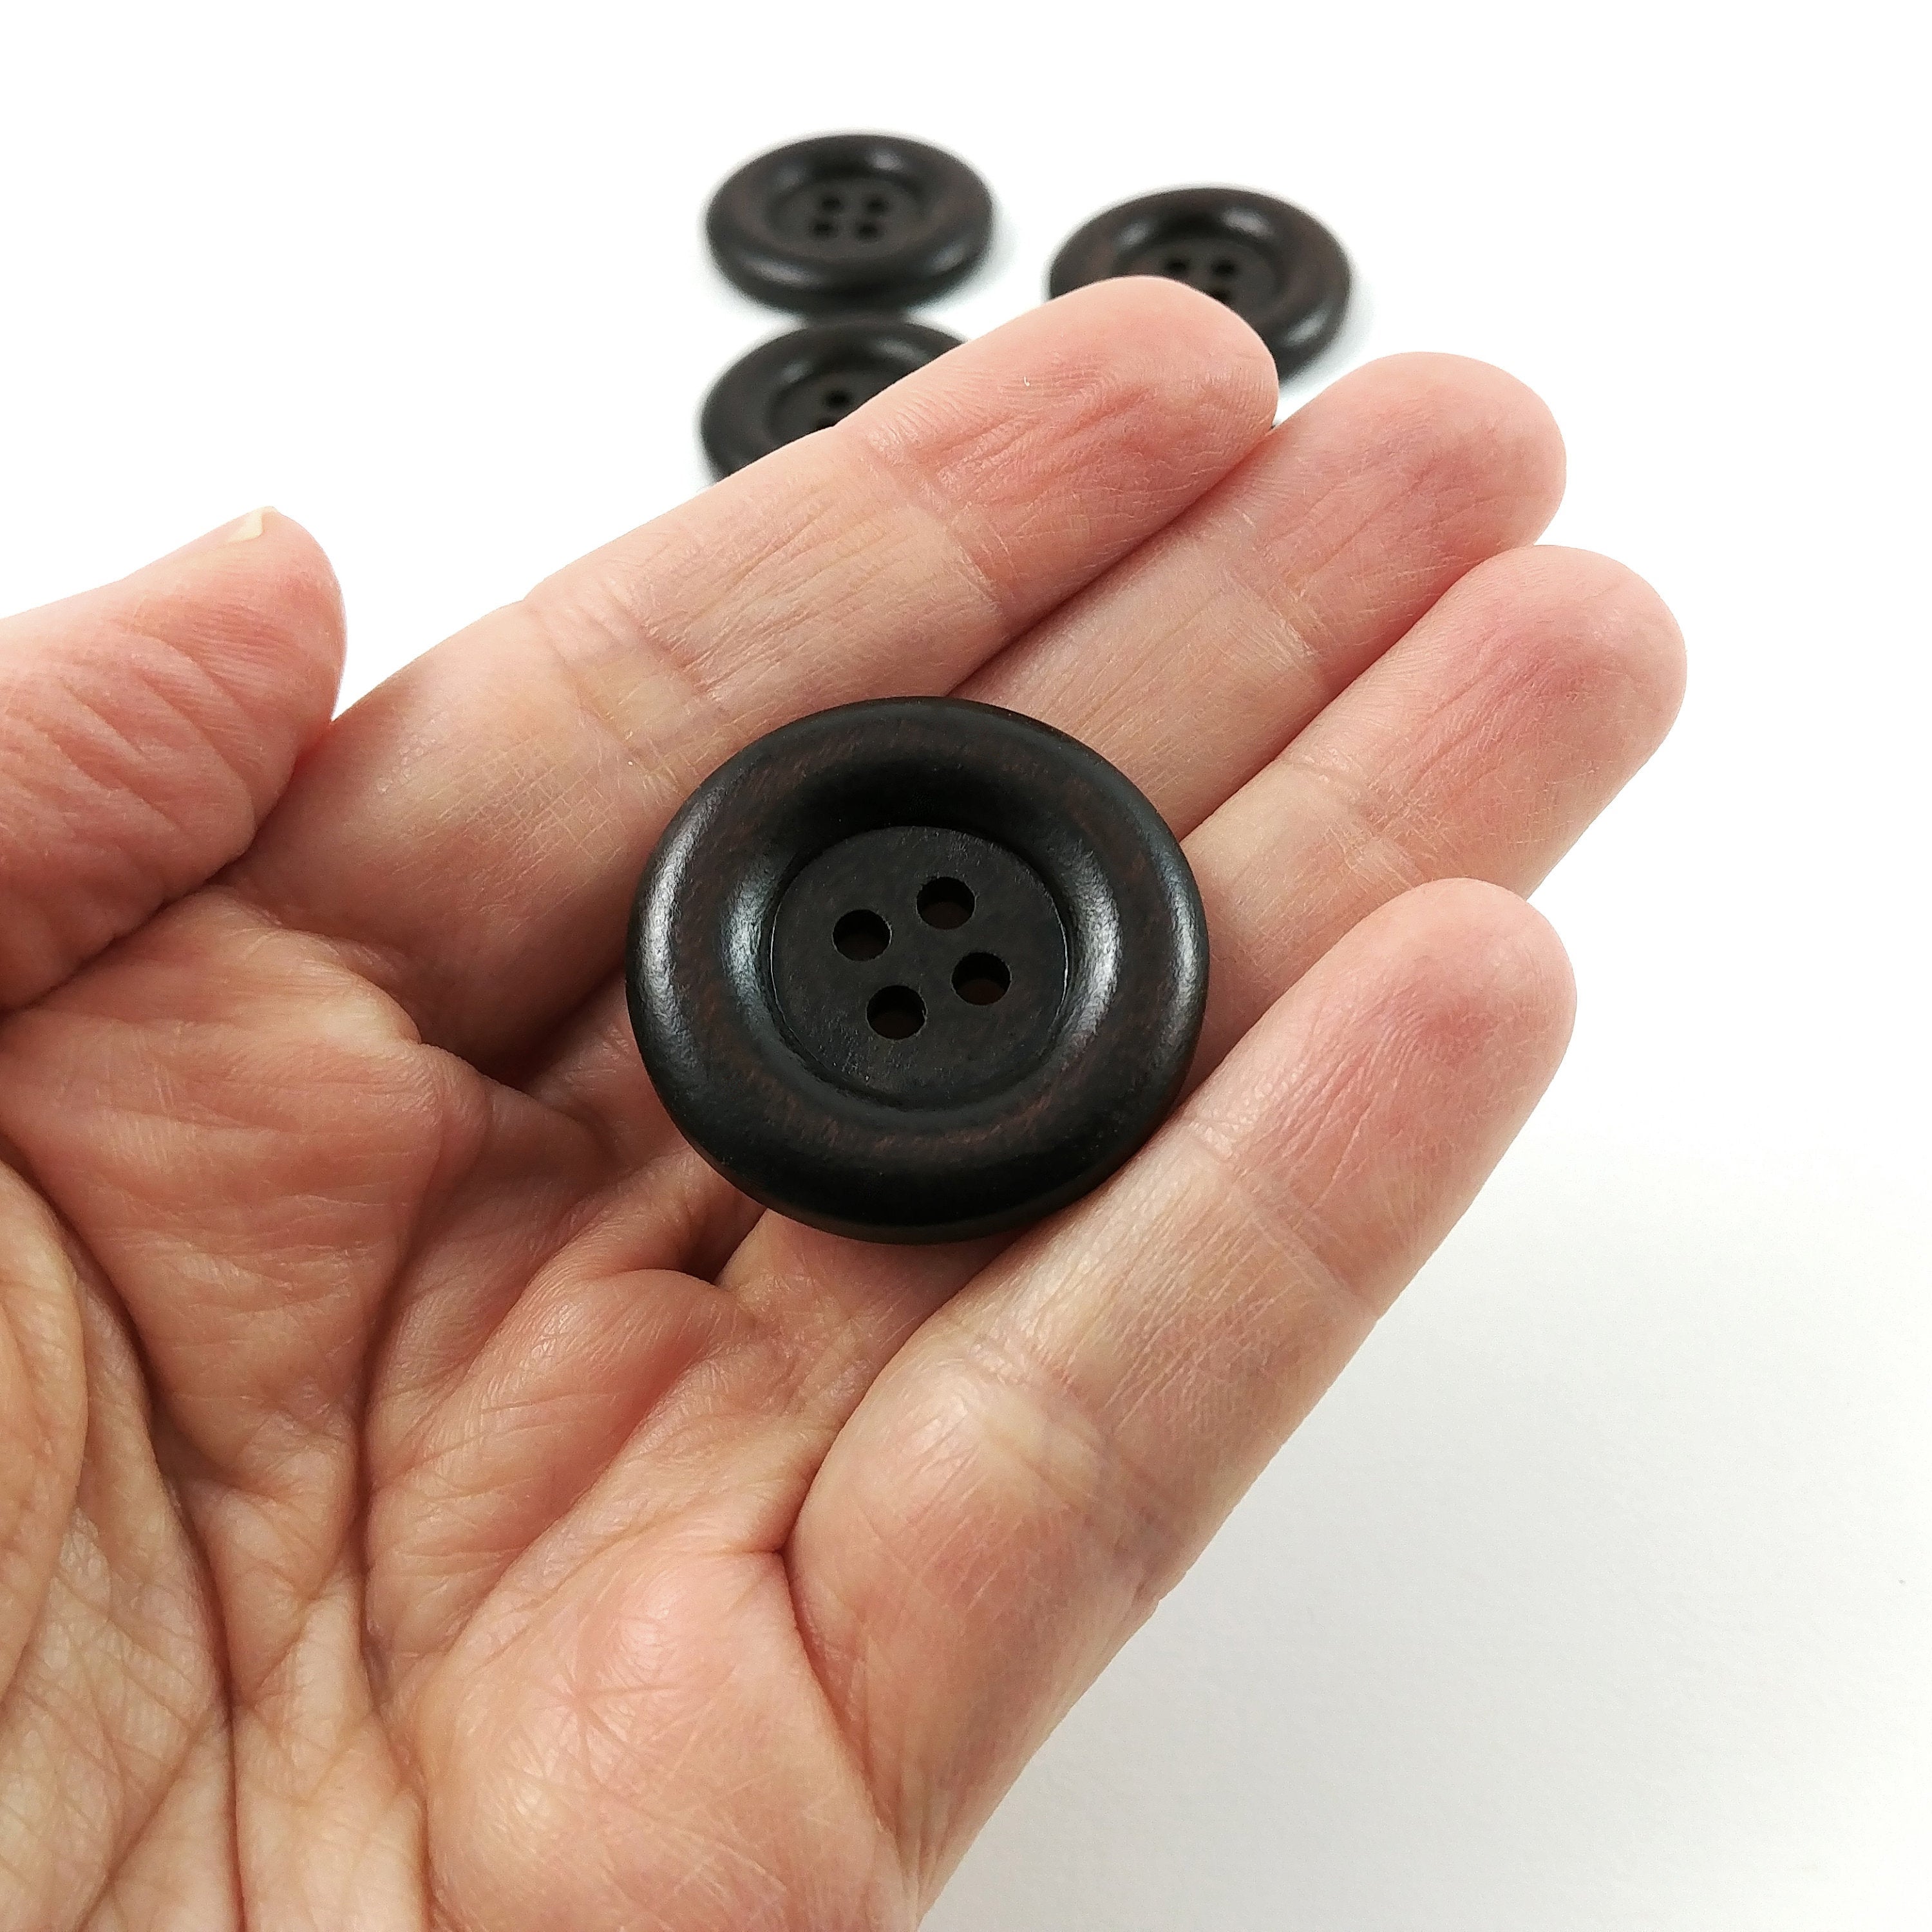 Dark brown Wooden Sewing Buttons 30mm - set of 6 natural wood buttons